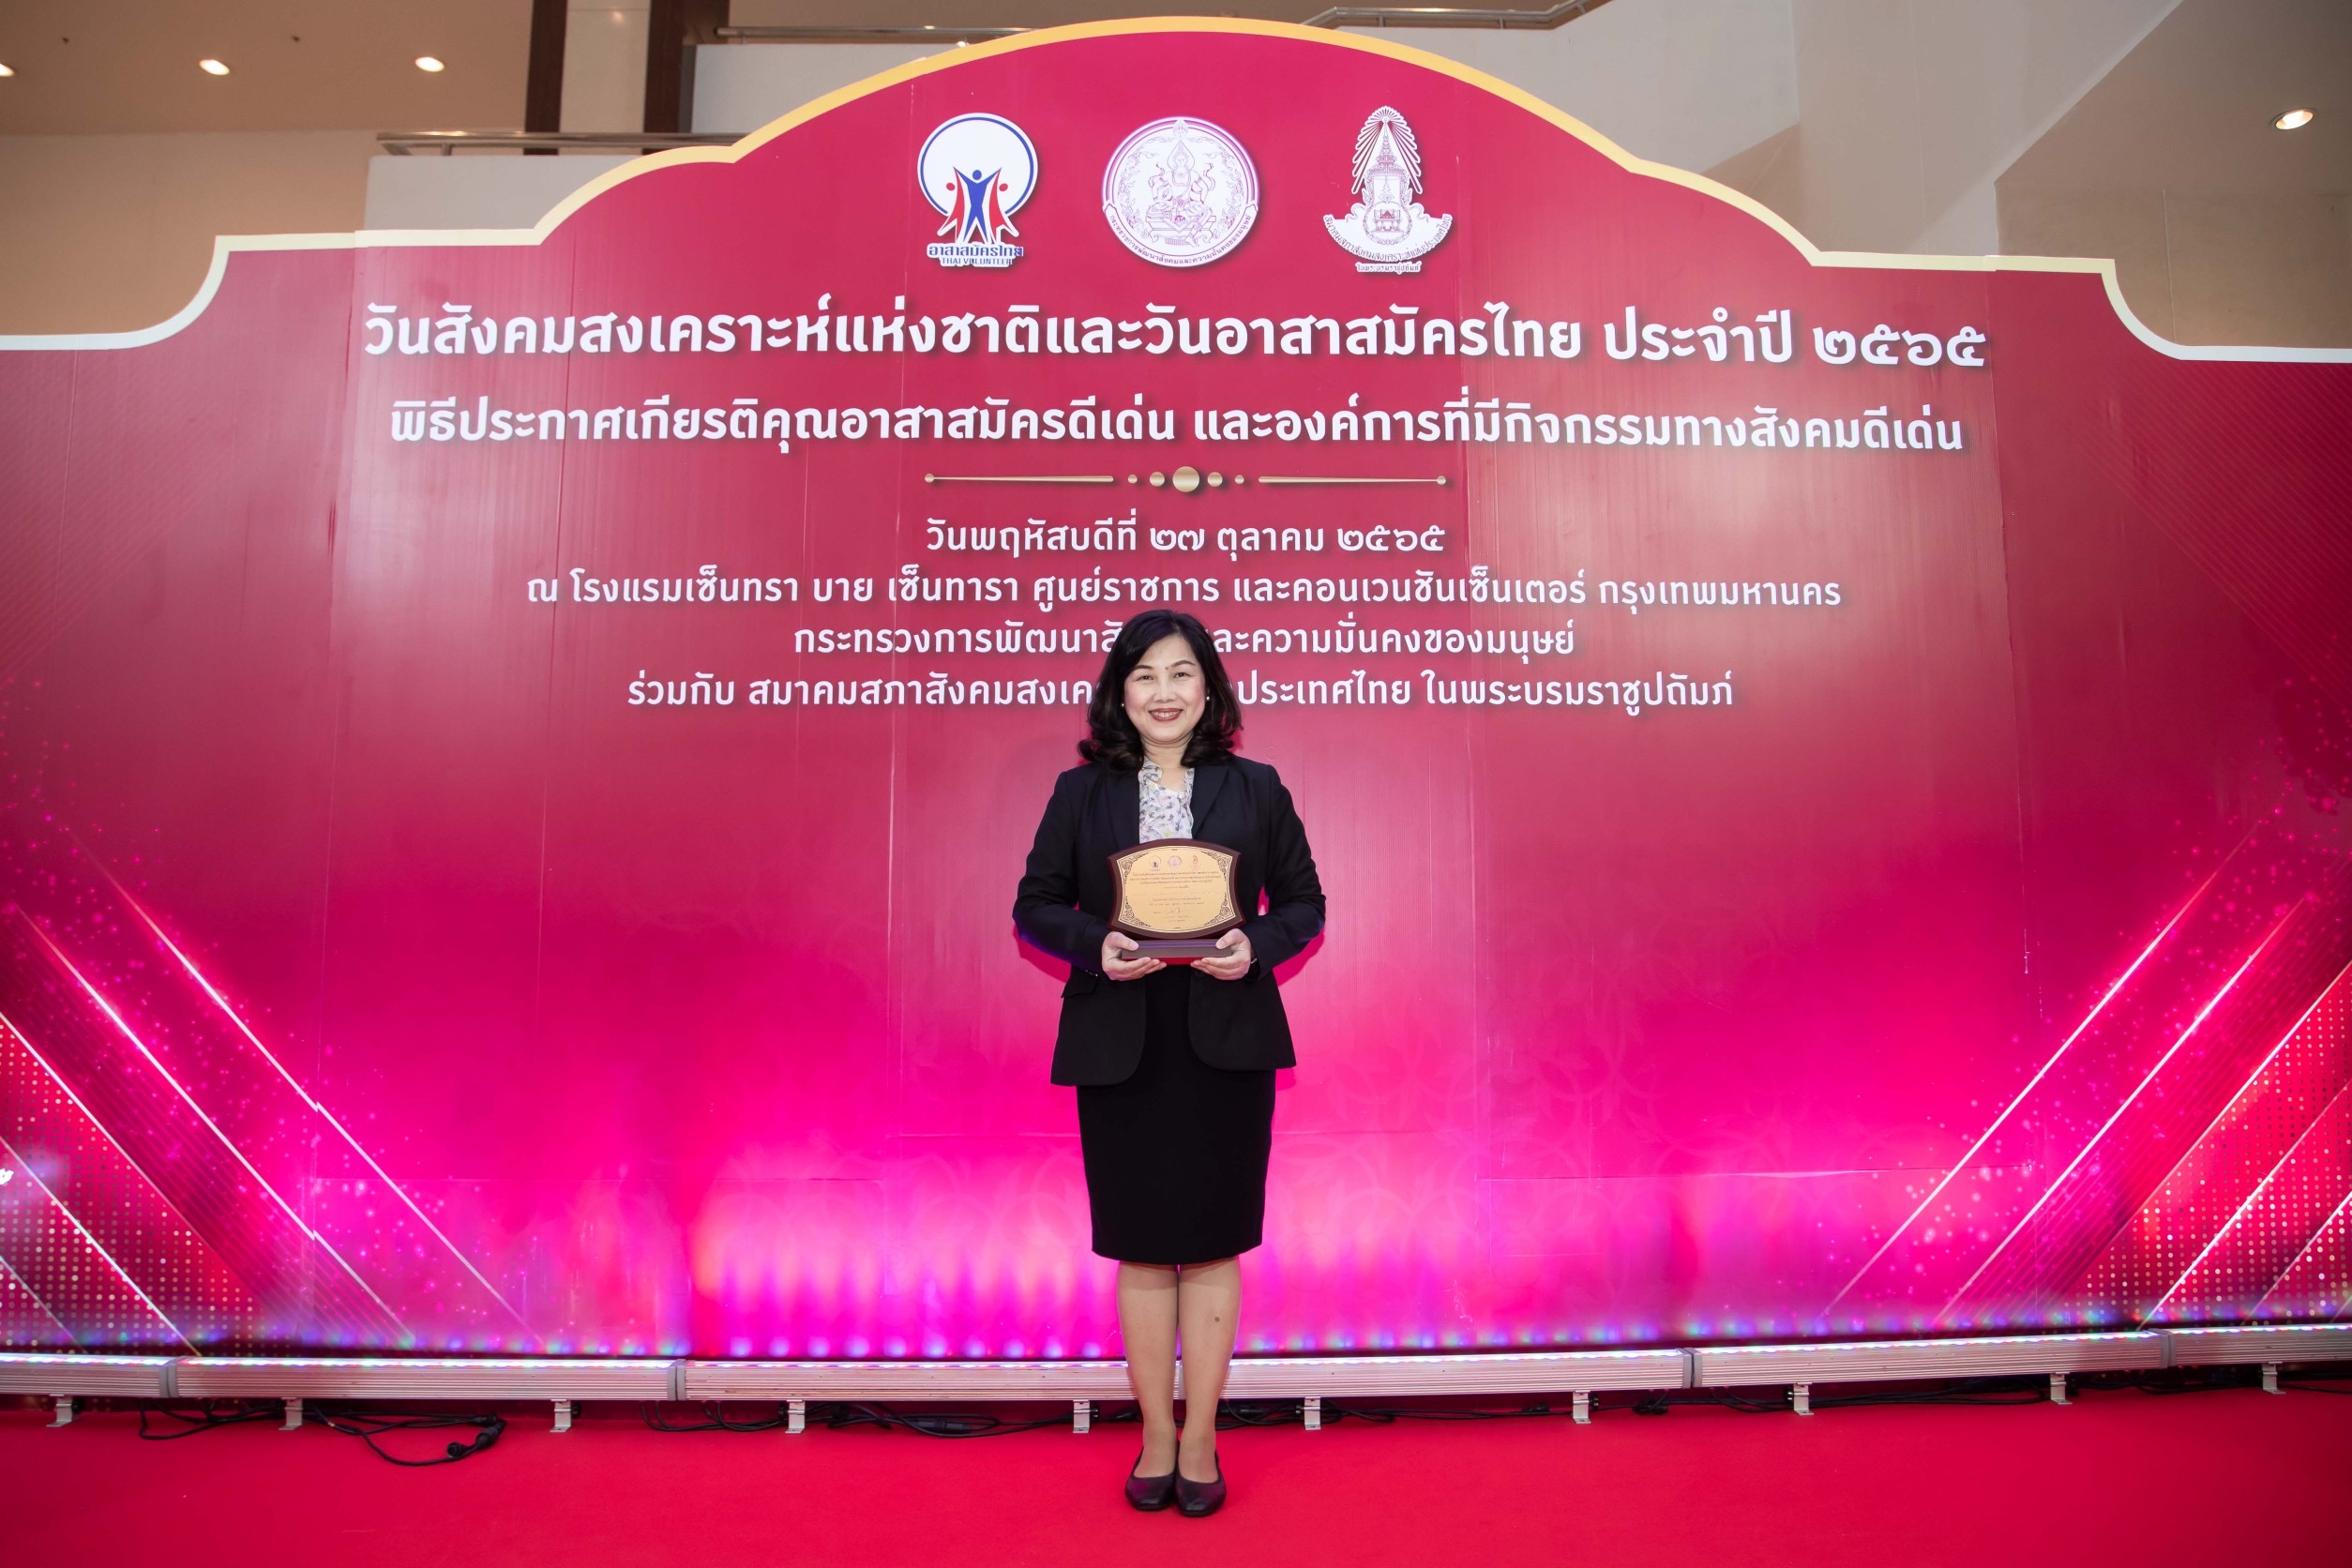 EXIM Thailand Receives Organization with Outstanding Social Activities Award 2022